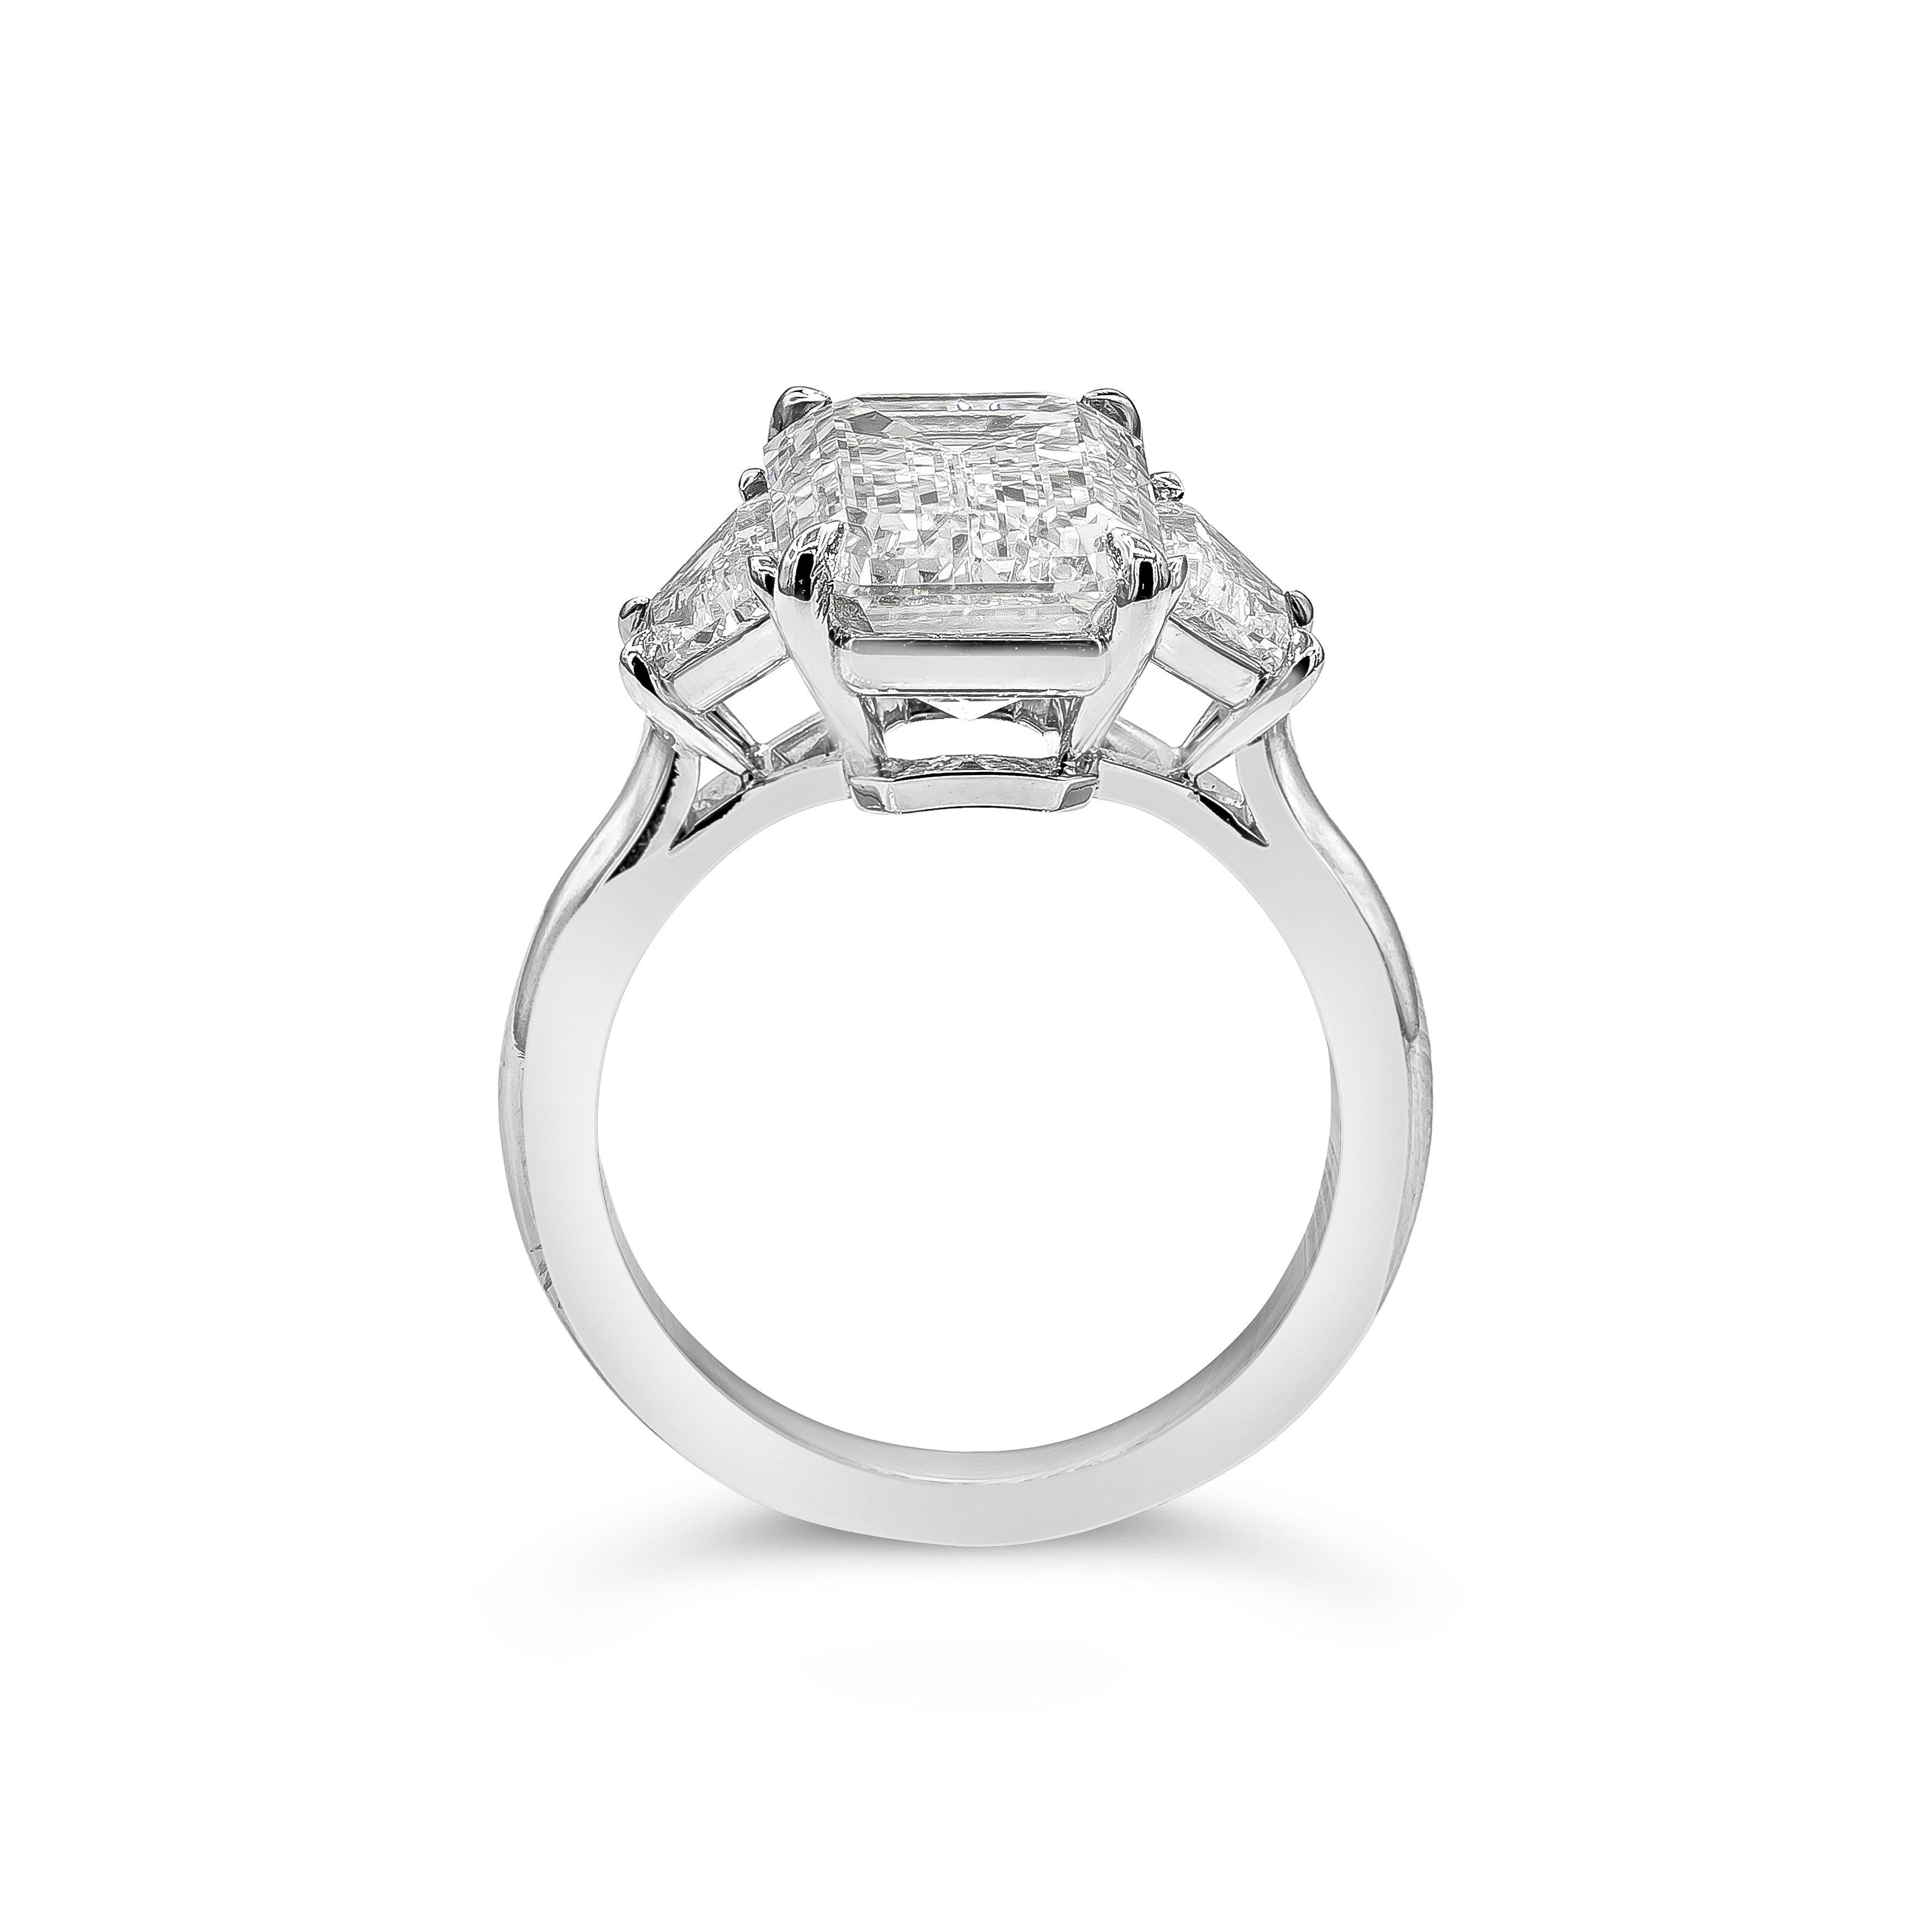 A classic and timeless engagement ring style showcasing a long emerald cut diamond weighing 5.80 carats and certified by GIA as I color, VVS1 clarity. Center diamond is flanked by two trapezoid diamonds weighing 0.88 carats total. Made in